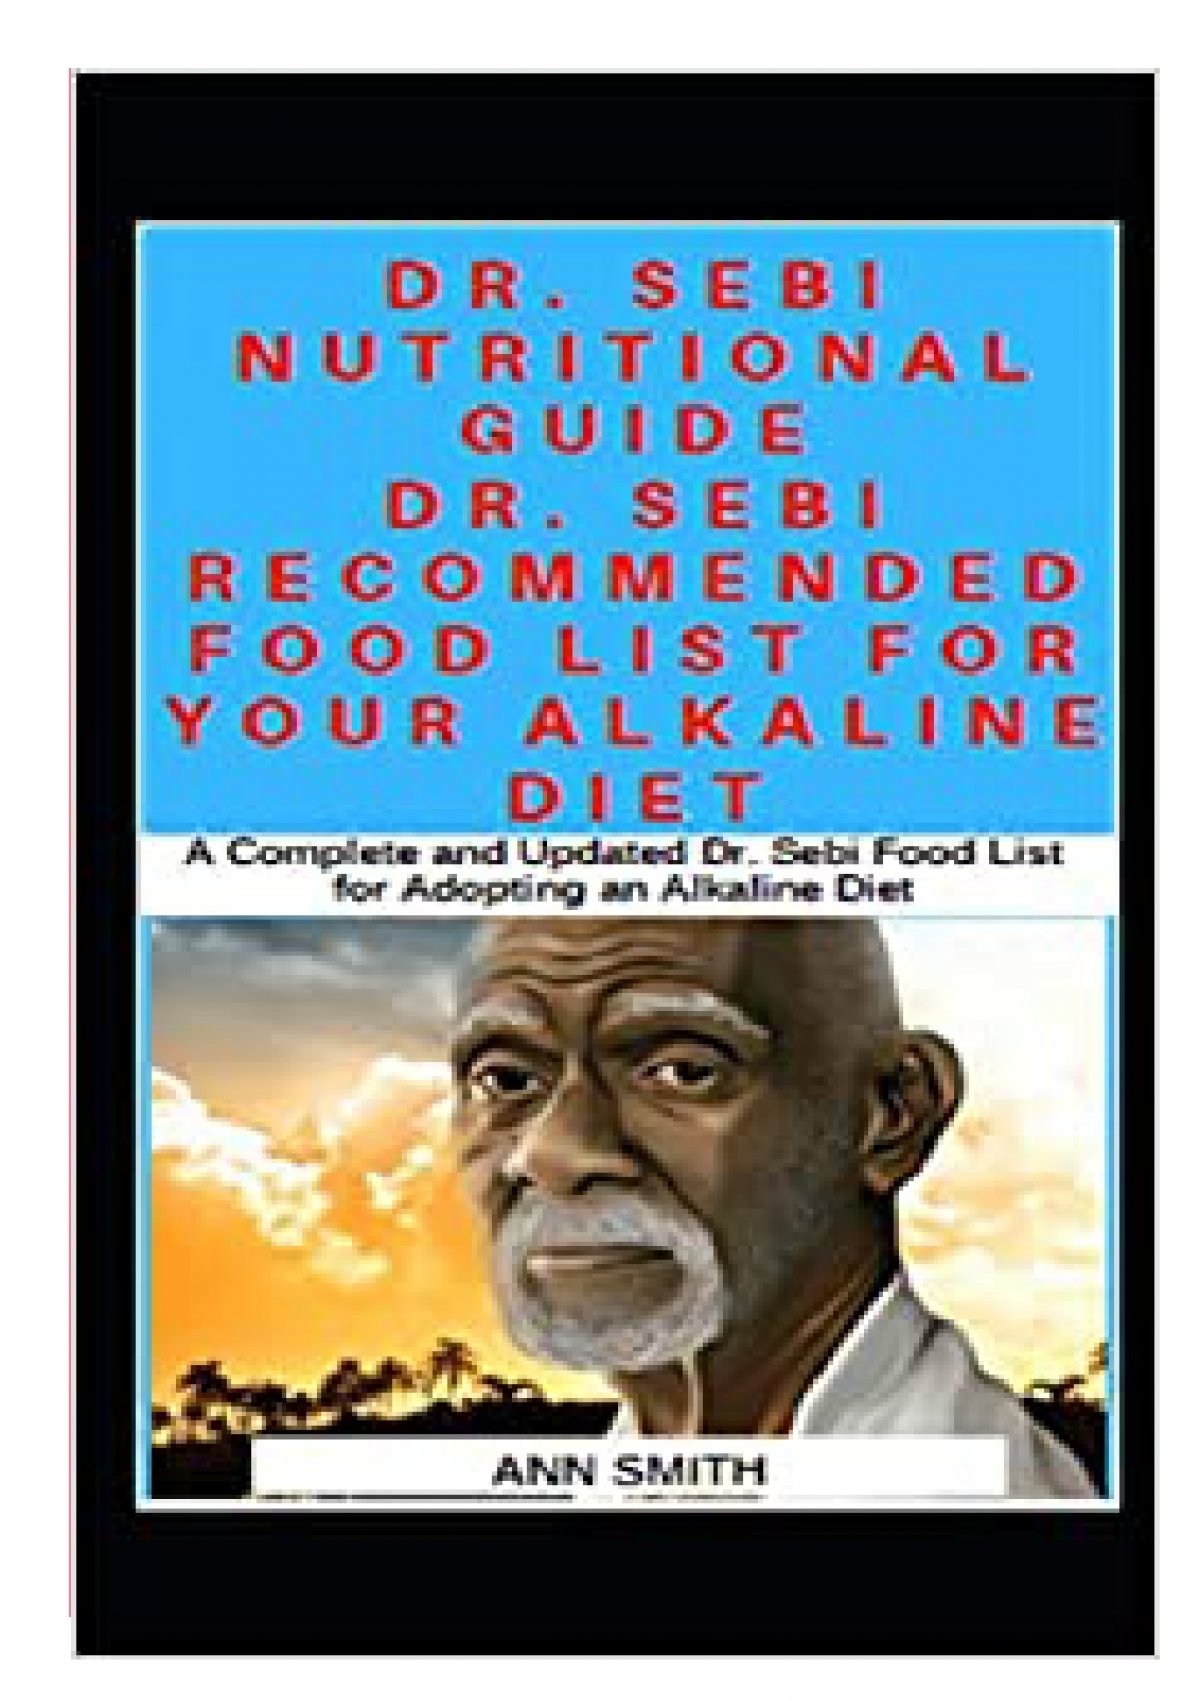 Download Dr Sebi Nutritional Guide Dr Sebi Recommended Food List For Your Alkaline Diet A Complete And Updated Dr Sebi Food List For Adopting An Alkaline Diet Book Online